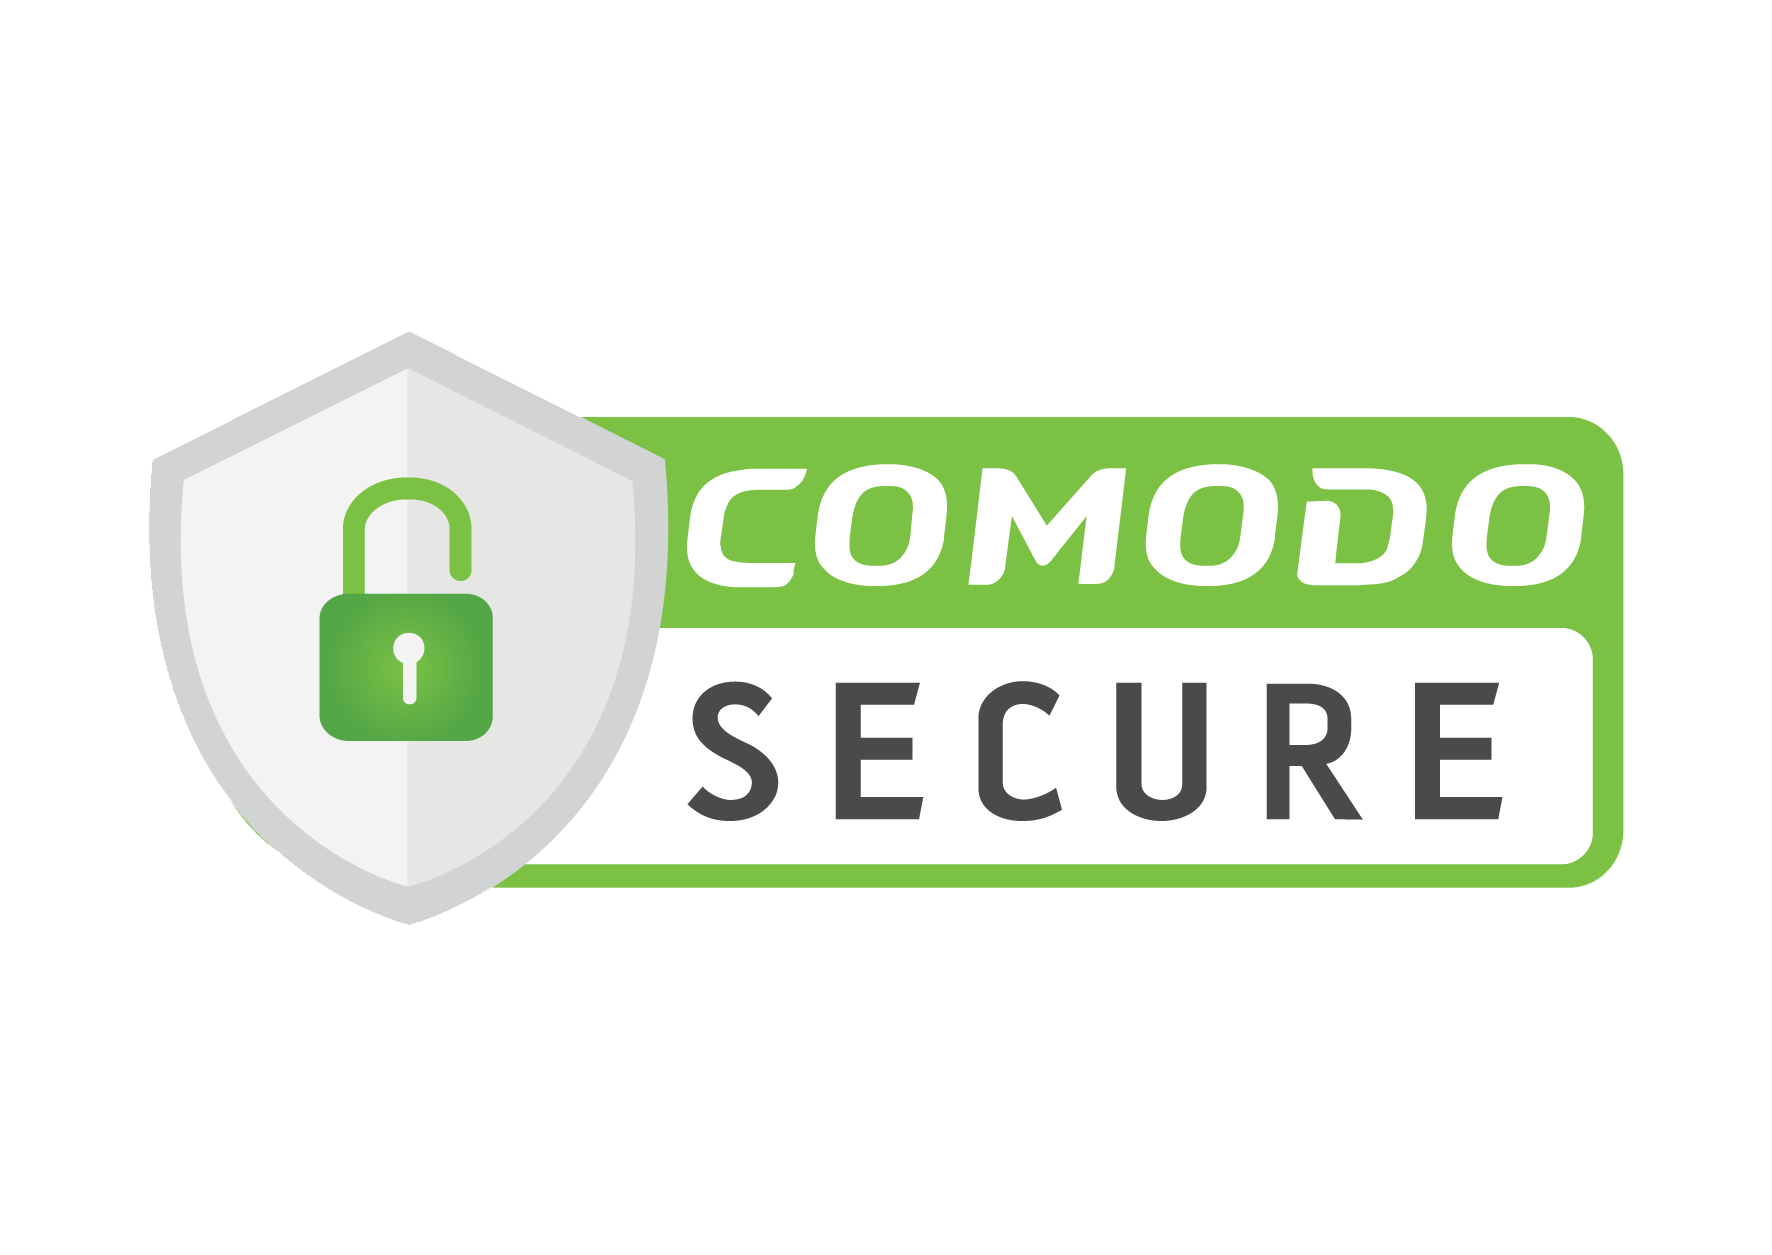 Protected by SSL (Secure Socket Layer) encryption